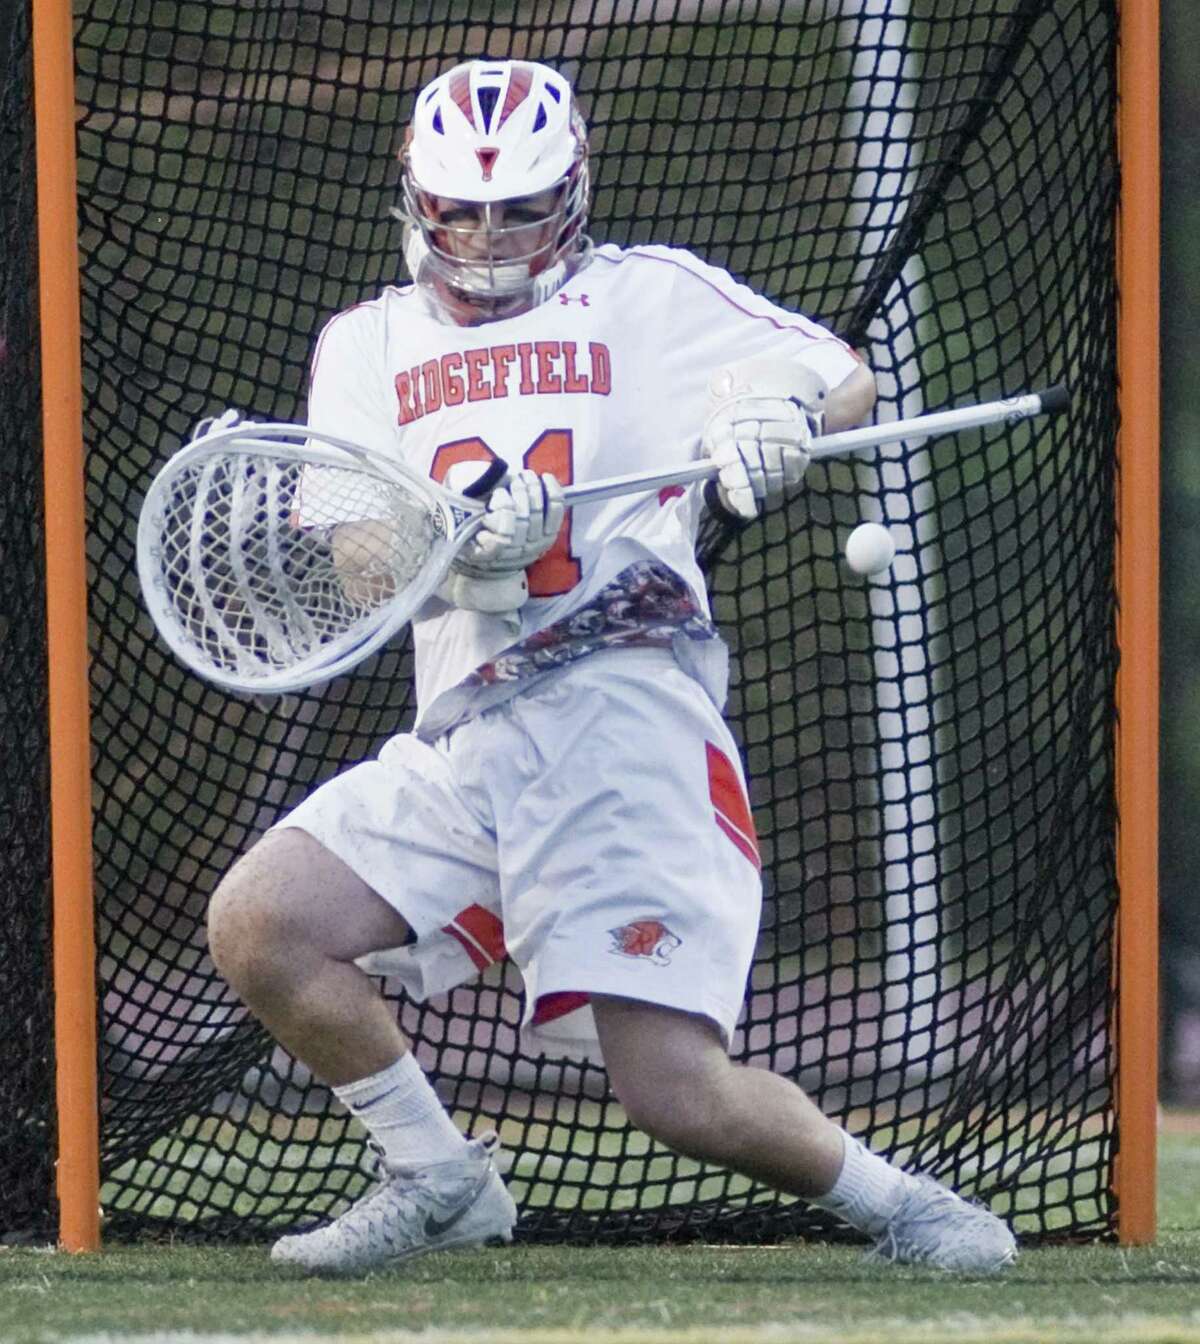 Ridgefield High School goaltender Daniel Parson tries for the save in a game against New Canaan High School, played at Ridgefield. Wednesday, May 17, 2017